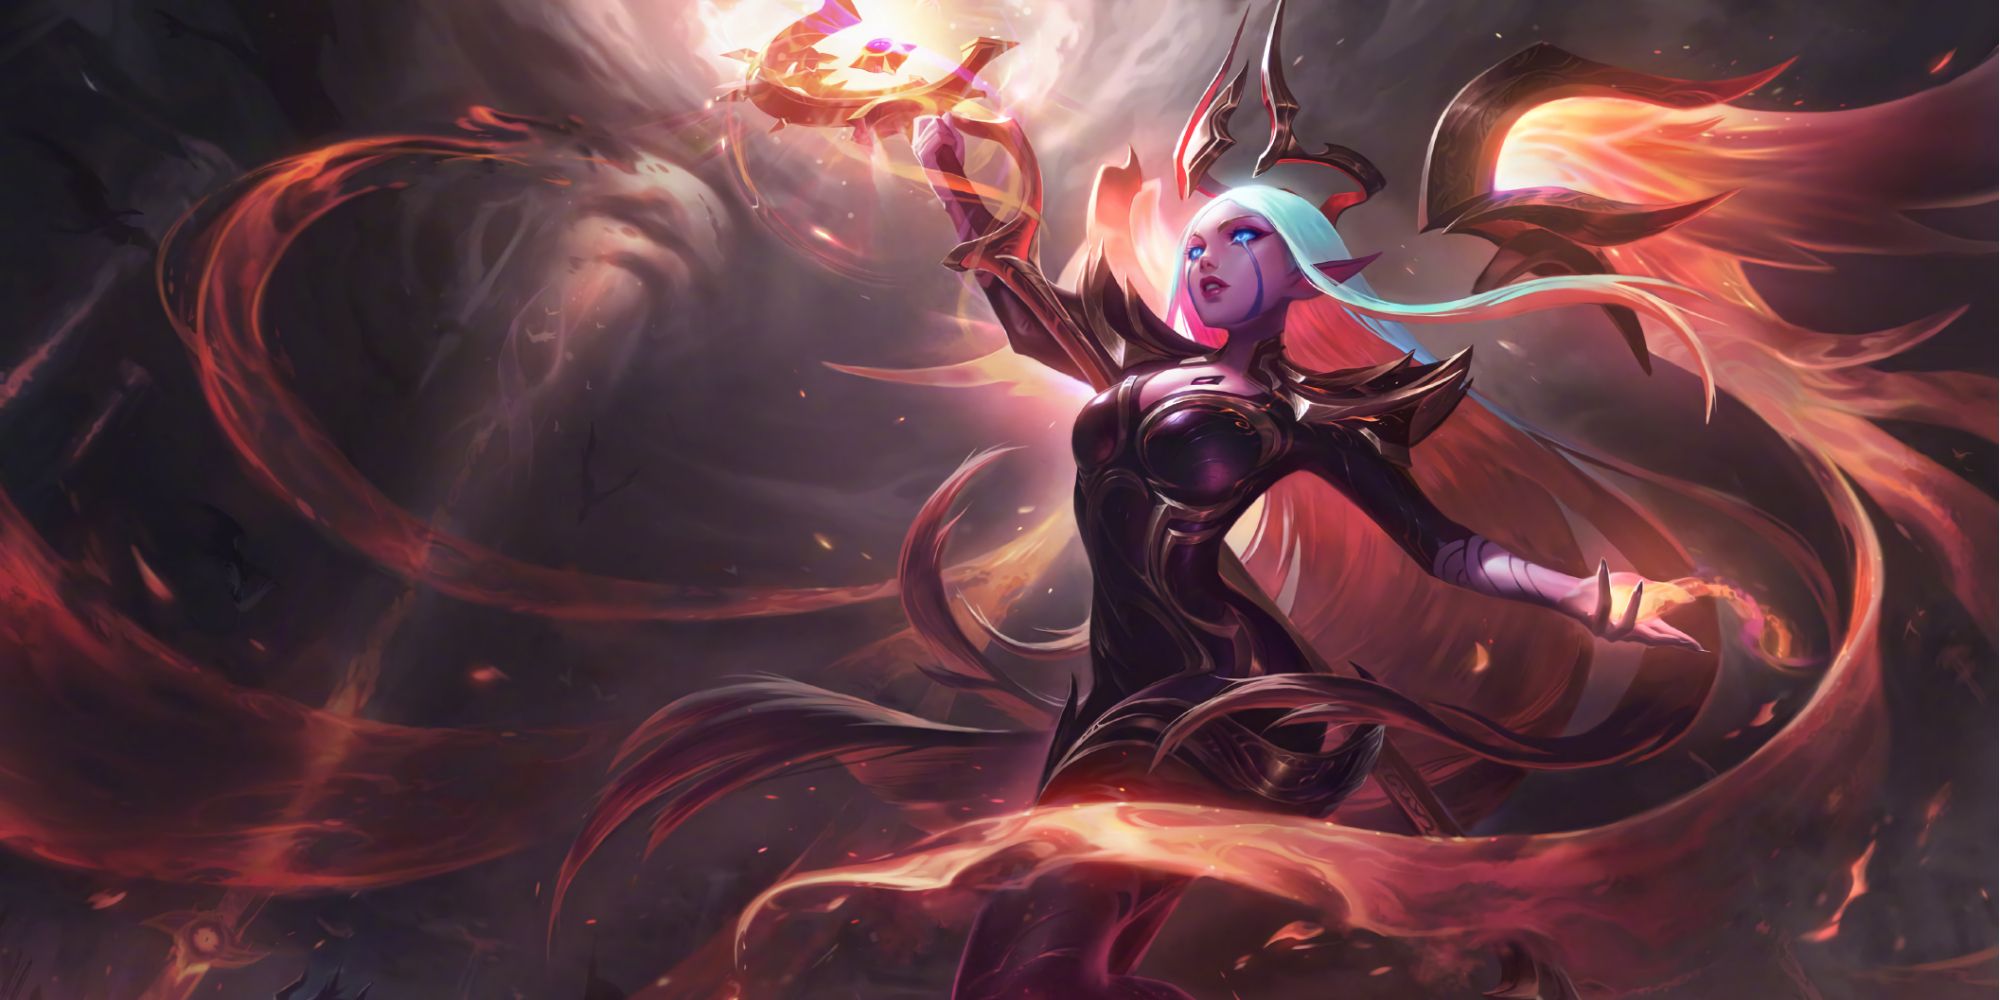 Night Bringer Soraka in her ashen glory offering us redemption with one hand while she raises another in condemnation 